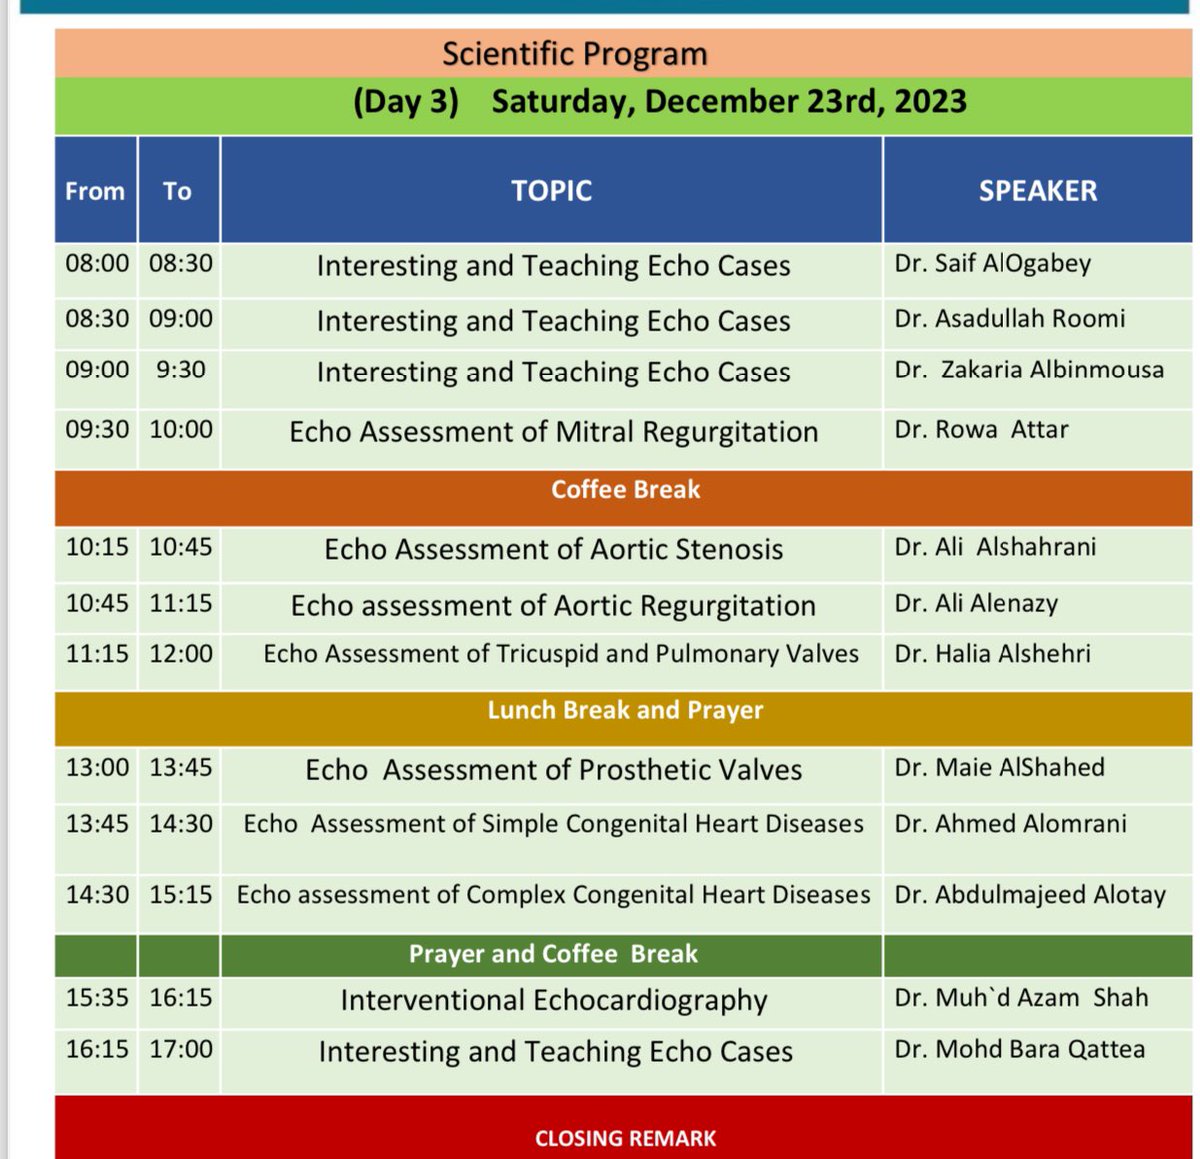 Join us this weekend for our hybrid comprehensive Echo Review Course. Great to lay it foundation of echo and get the uptodate info in this field. Free attendance for all (to claim CME, u need to register and pay). Zoom link below shorturl.at/nvMZ3